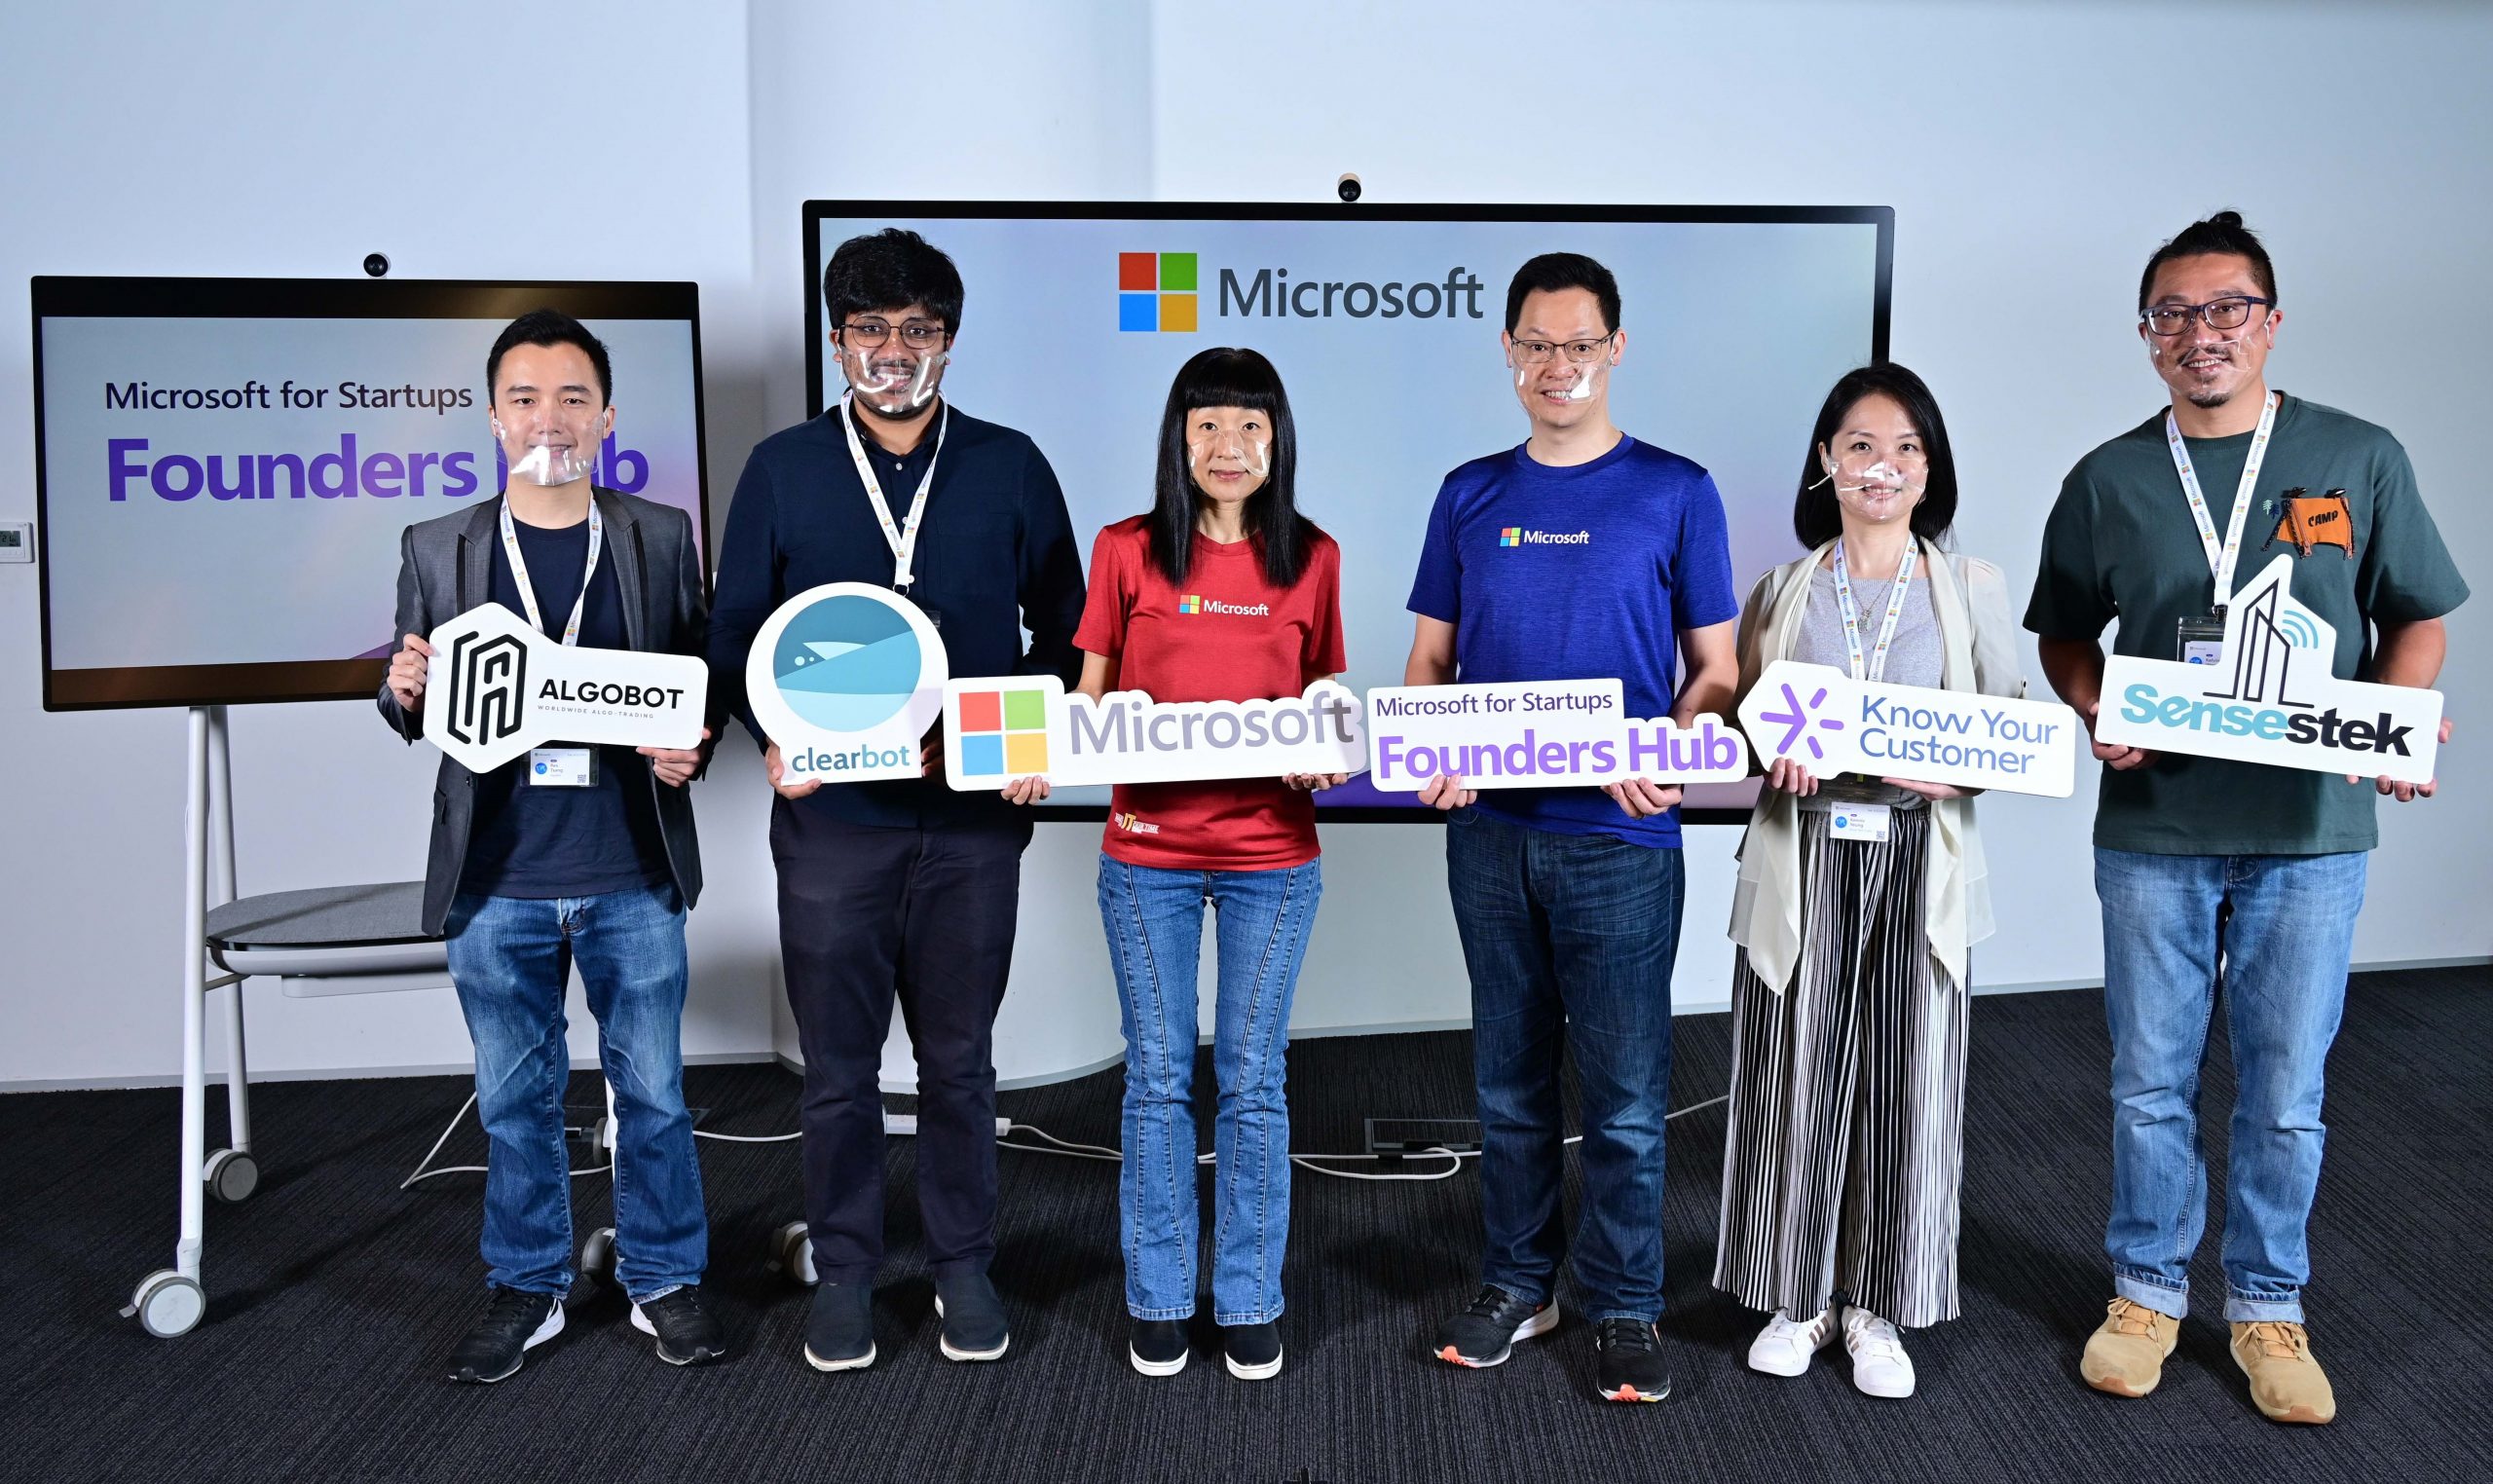 Microsoft formally introduces the Microsoft for Startups Founders Hub in Hong Kong